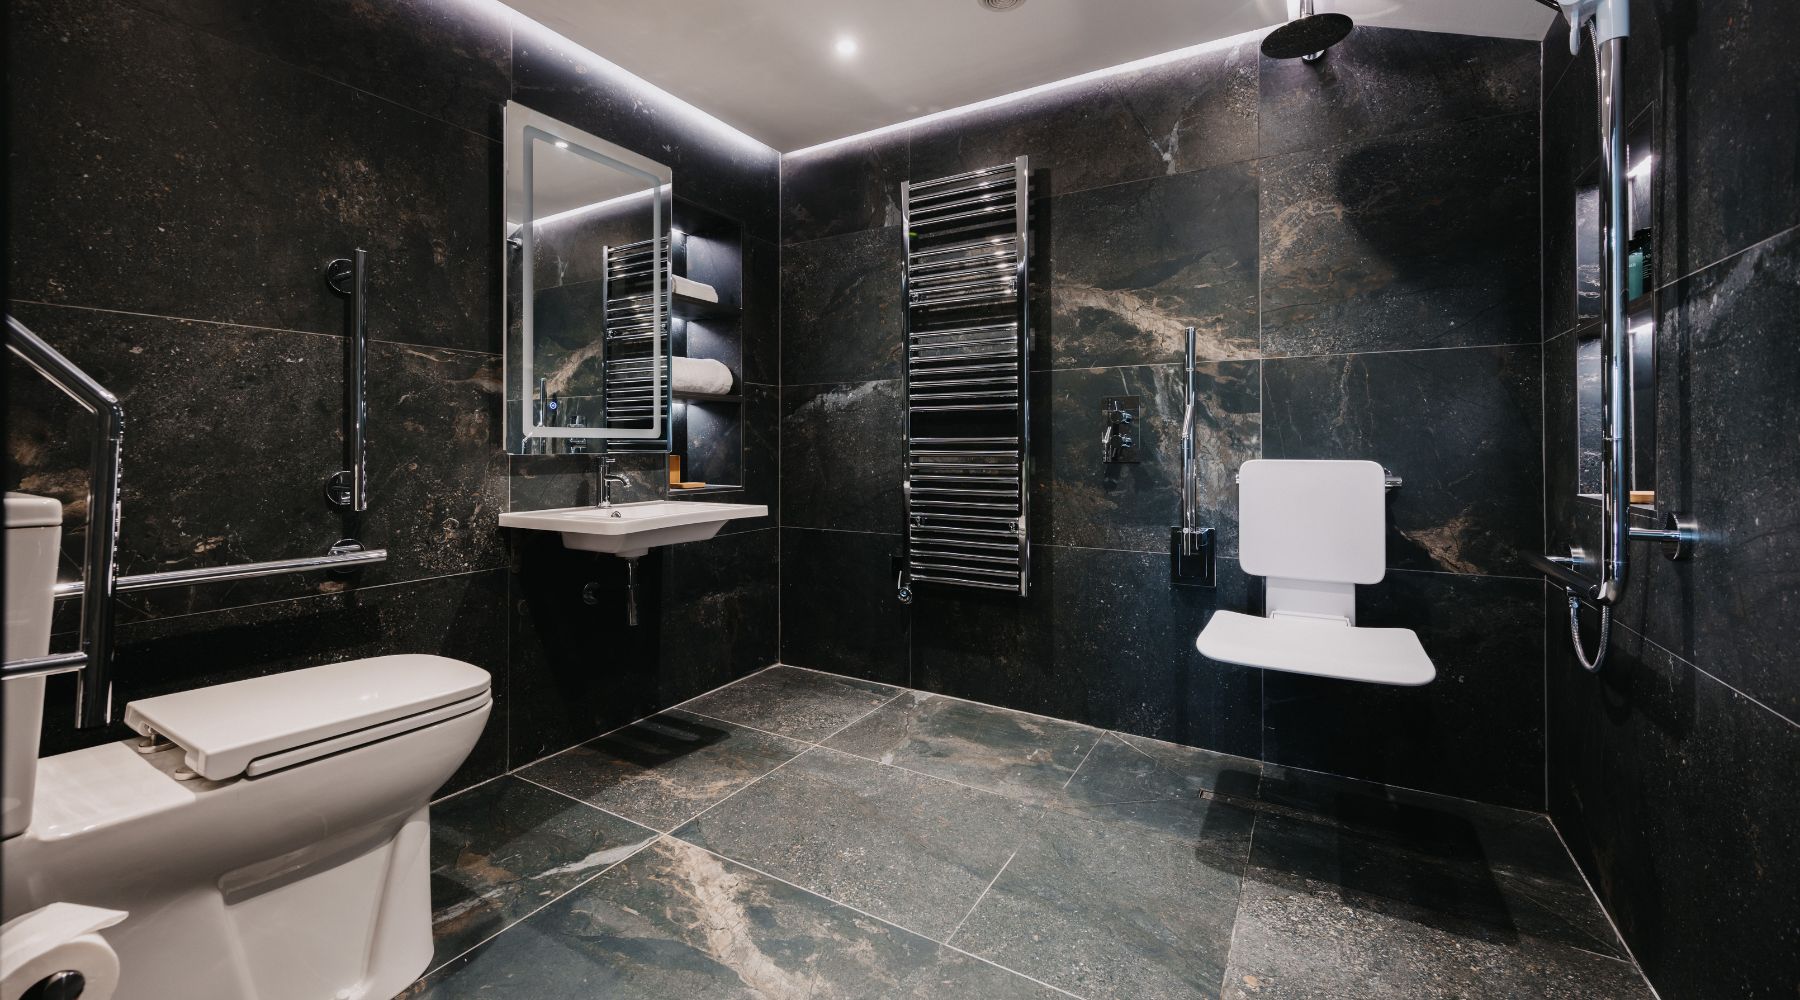 Luxury accessible bathroom with grab rails, wall mounted shower seat and basin, and black and white marble effect tiles